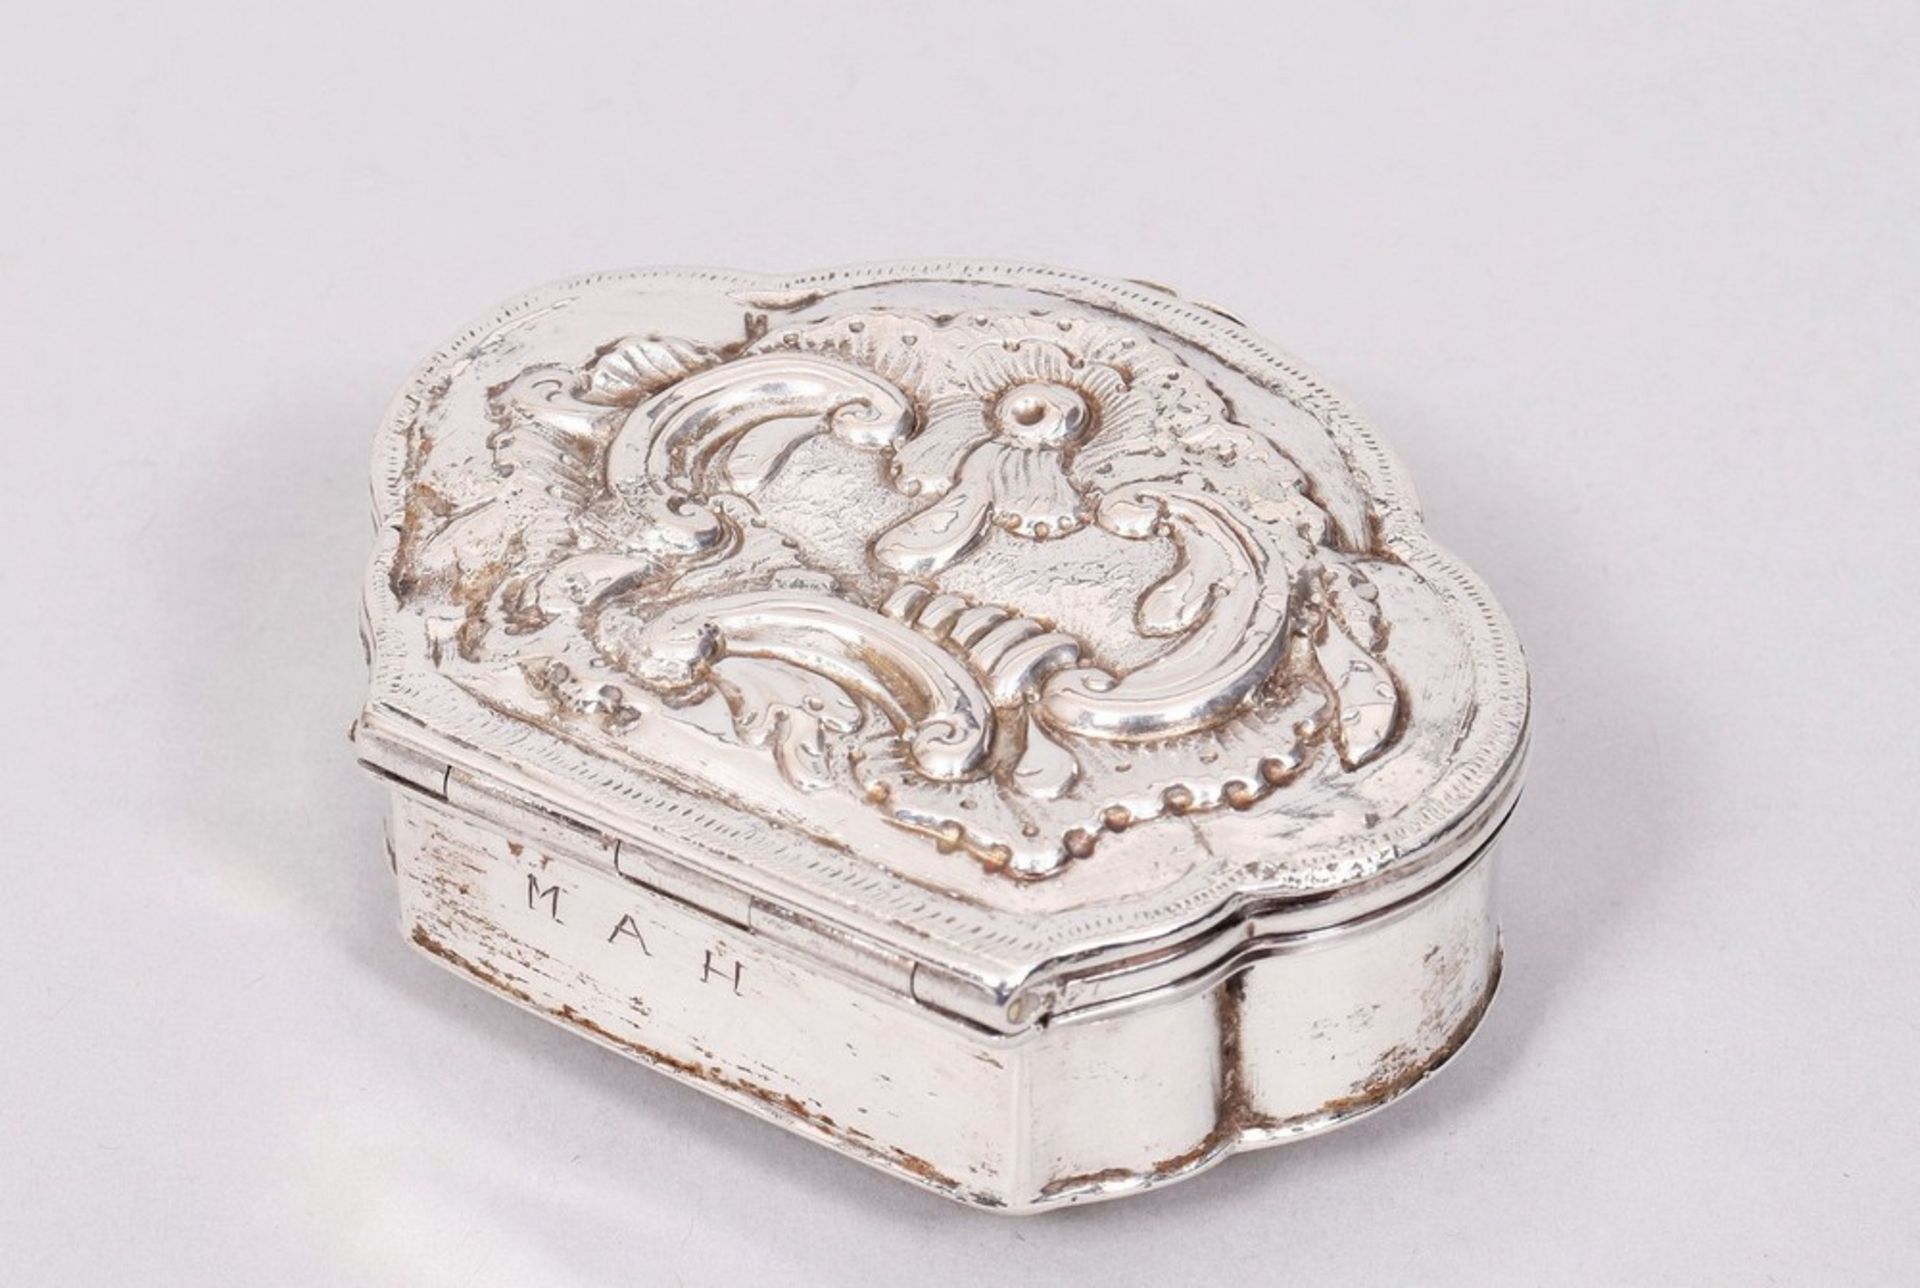 Baroque snuff box, silver, Christian Hecht (1733-1794), Jever, 2nd half 18th C. - Image 3 of 5